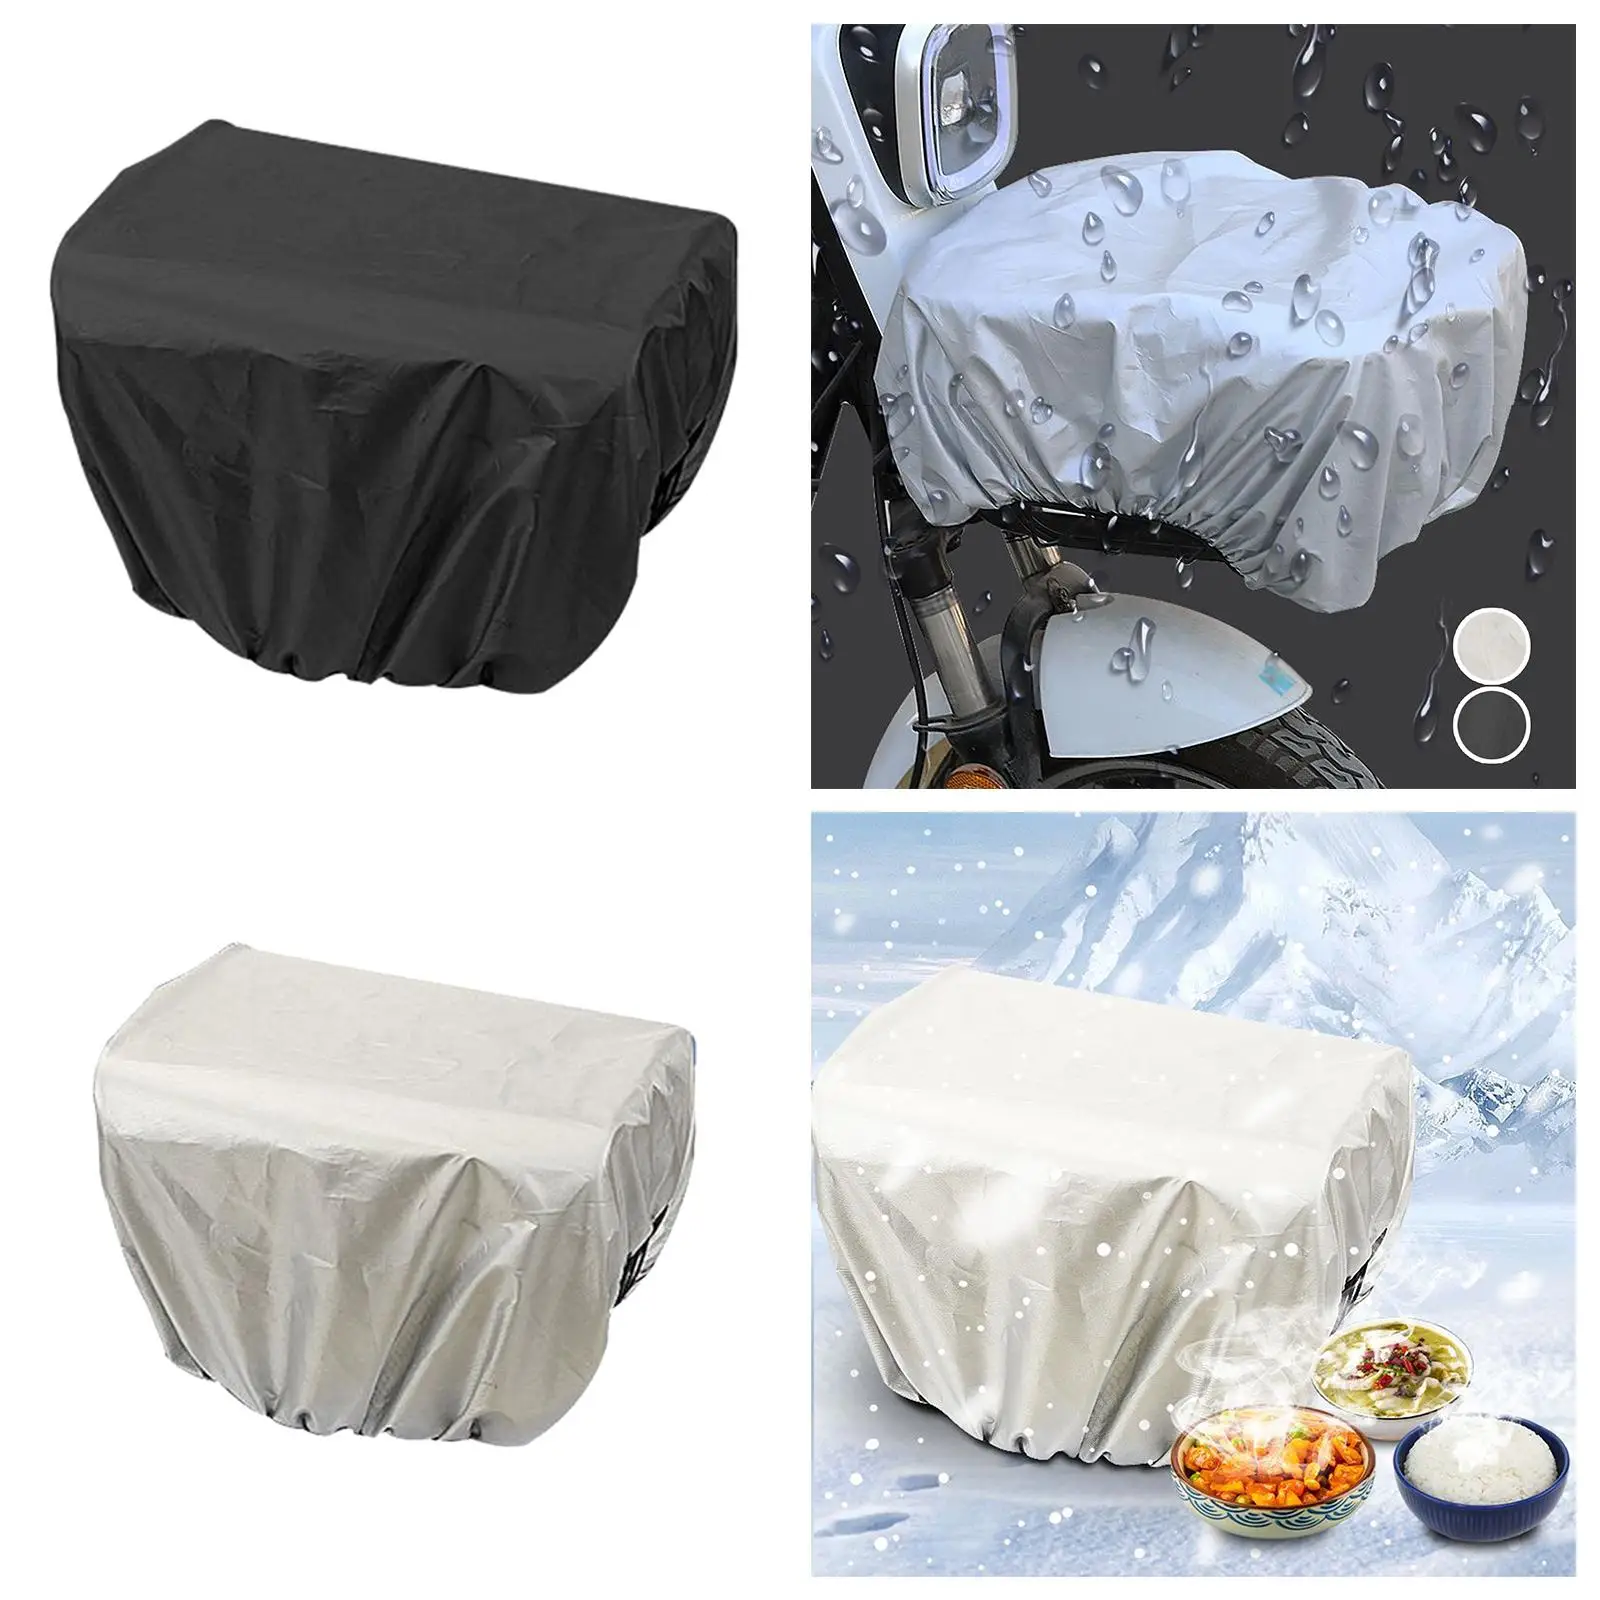 Bike Basket Protective Cover for Tricycles Women Motorcycles